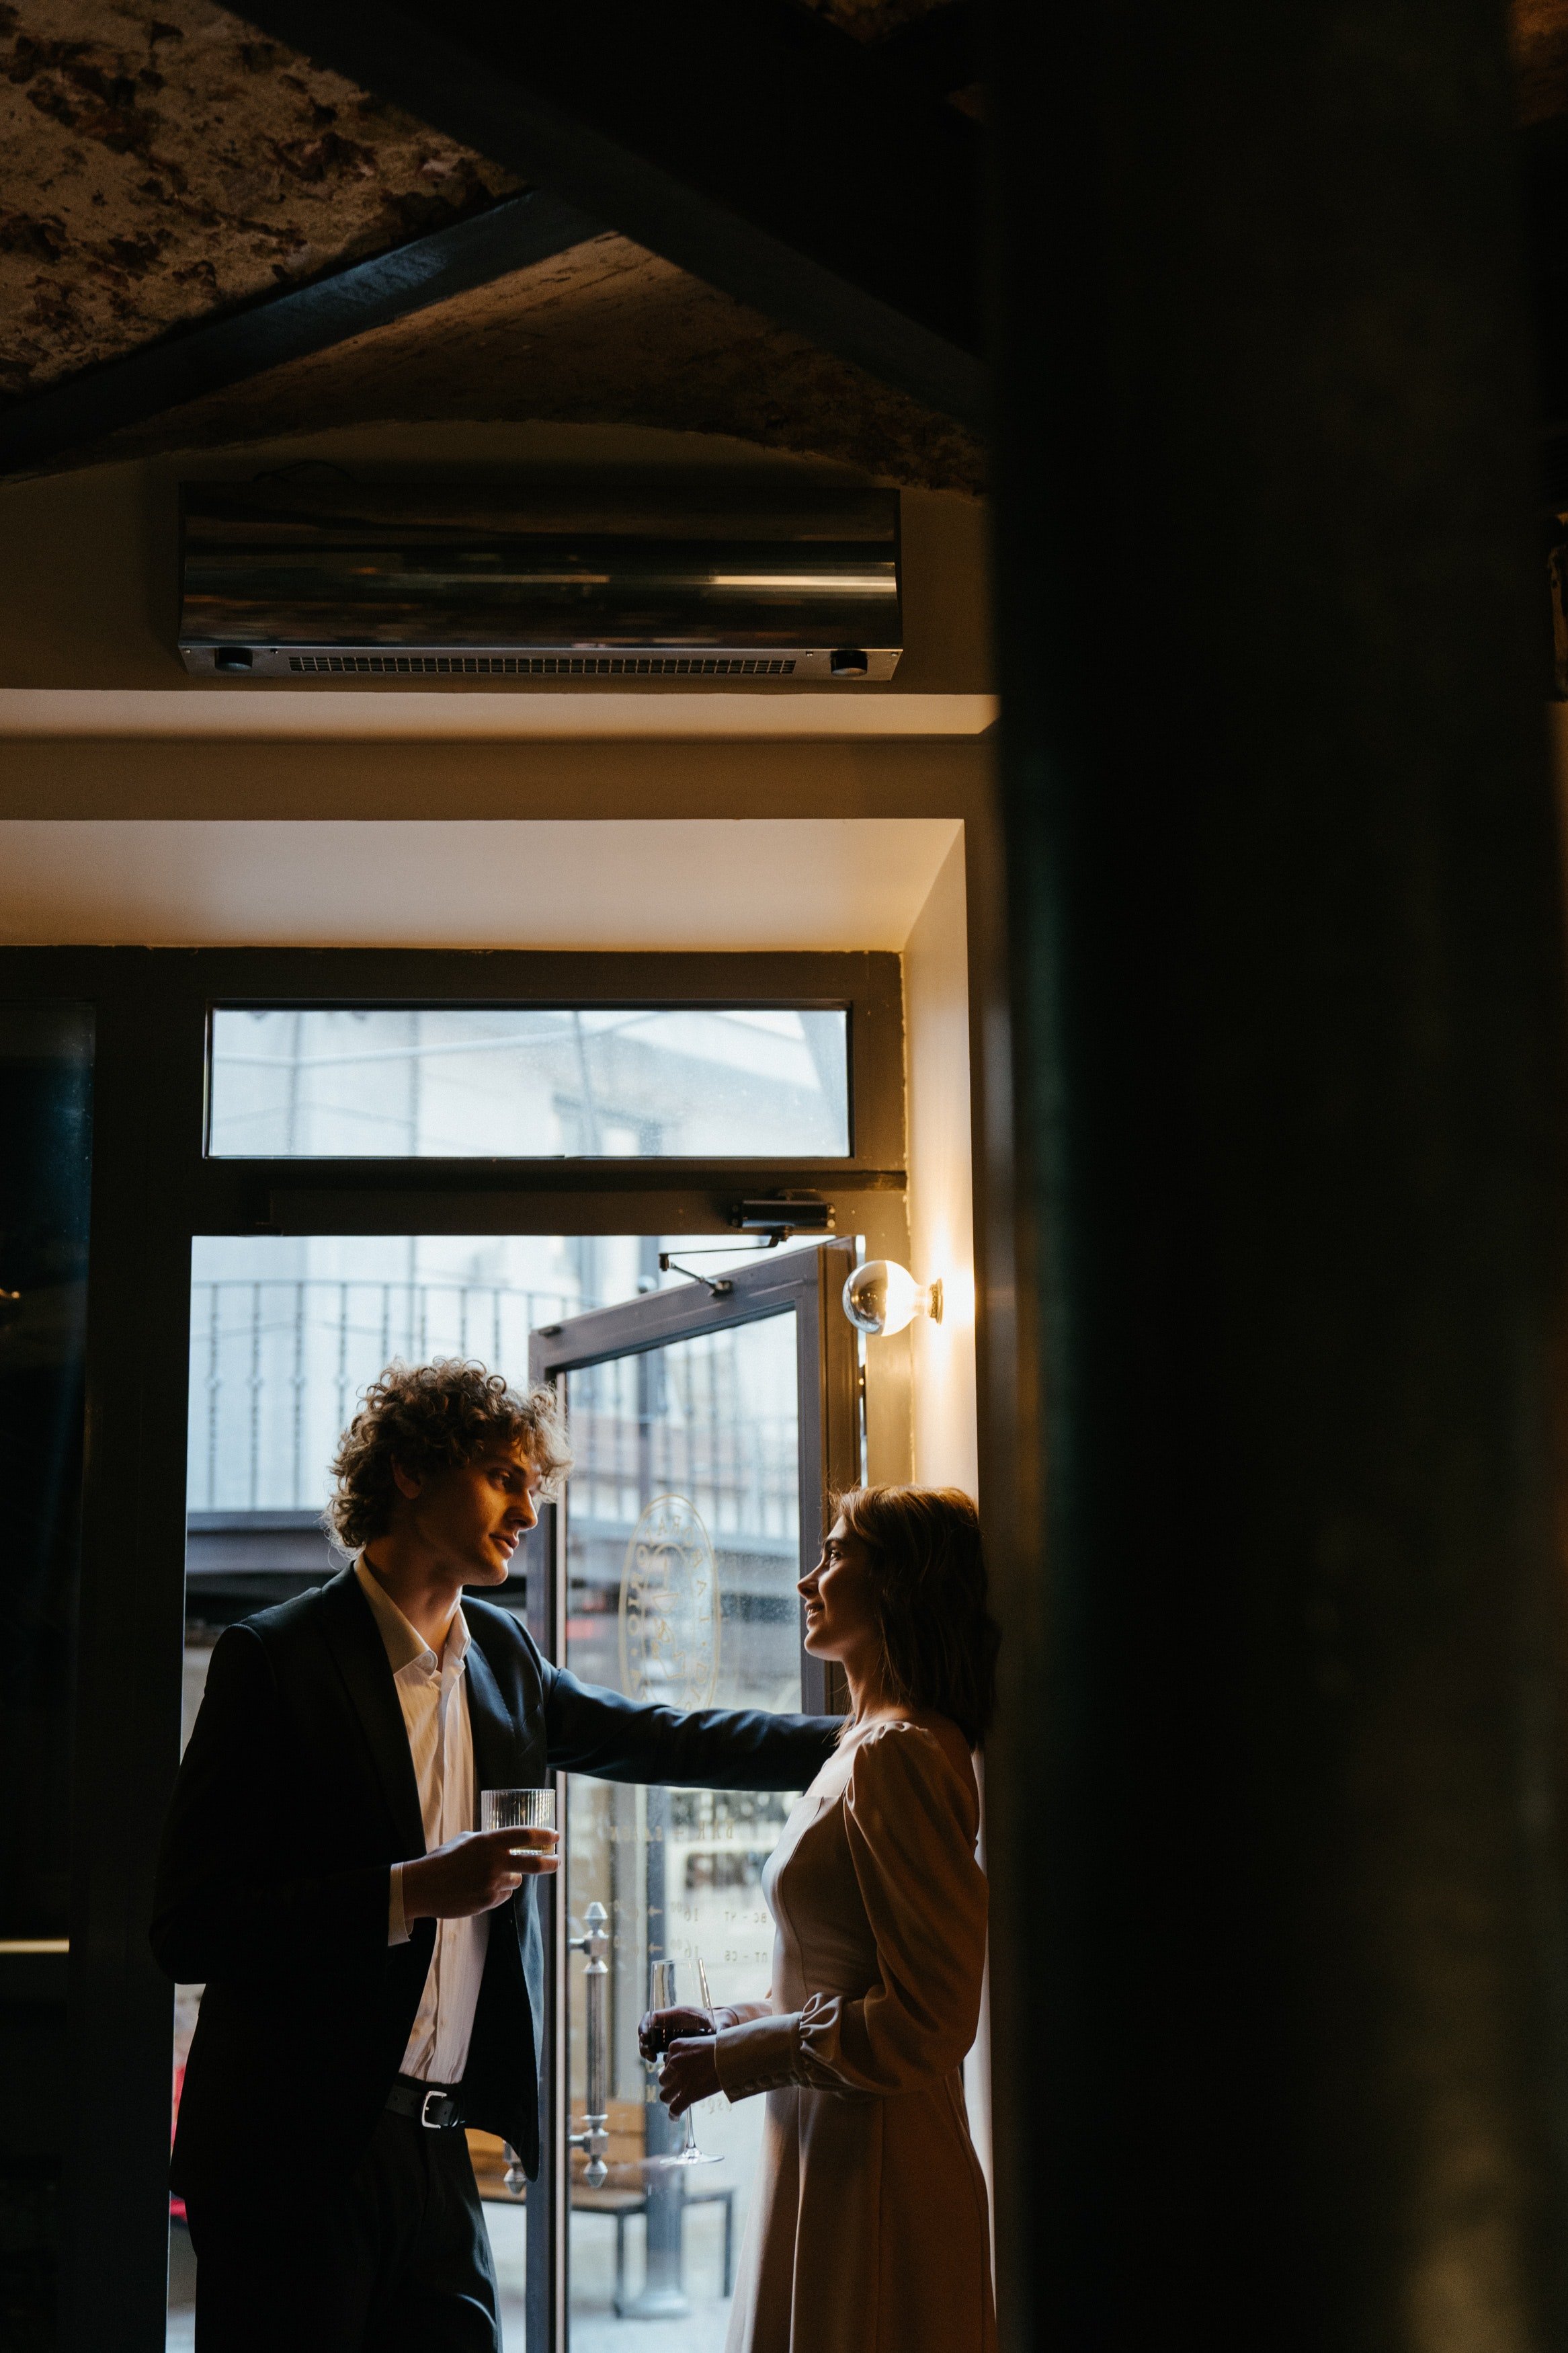 Man in black suit standing in front of a woman | Photo: Pexels